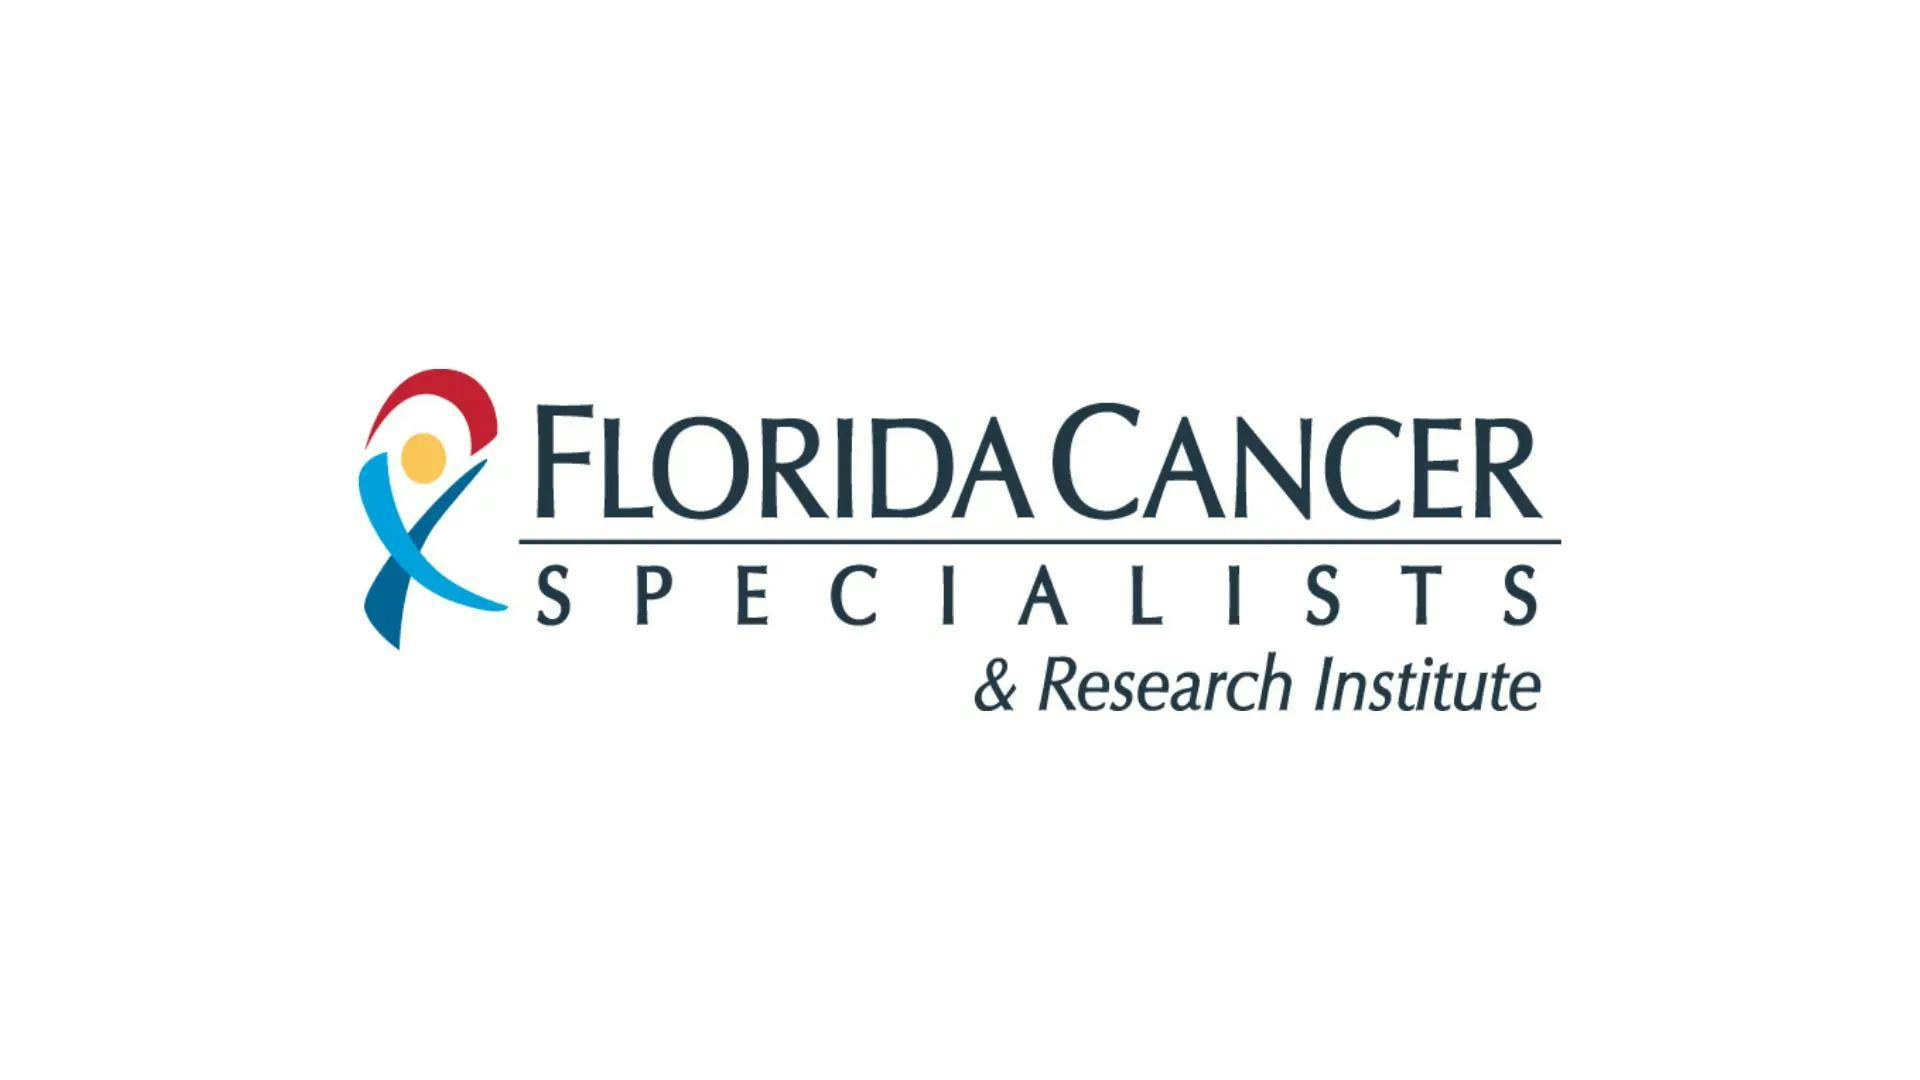 Florida Cancer Specialists & Research Institute First in Palm Beach County To Offer Targeted Radioligand Therapy for Metastatic Prostate Cancer